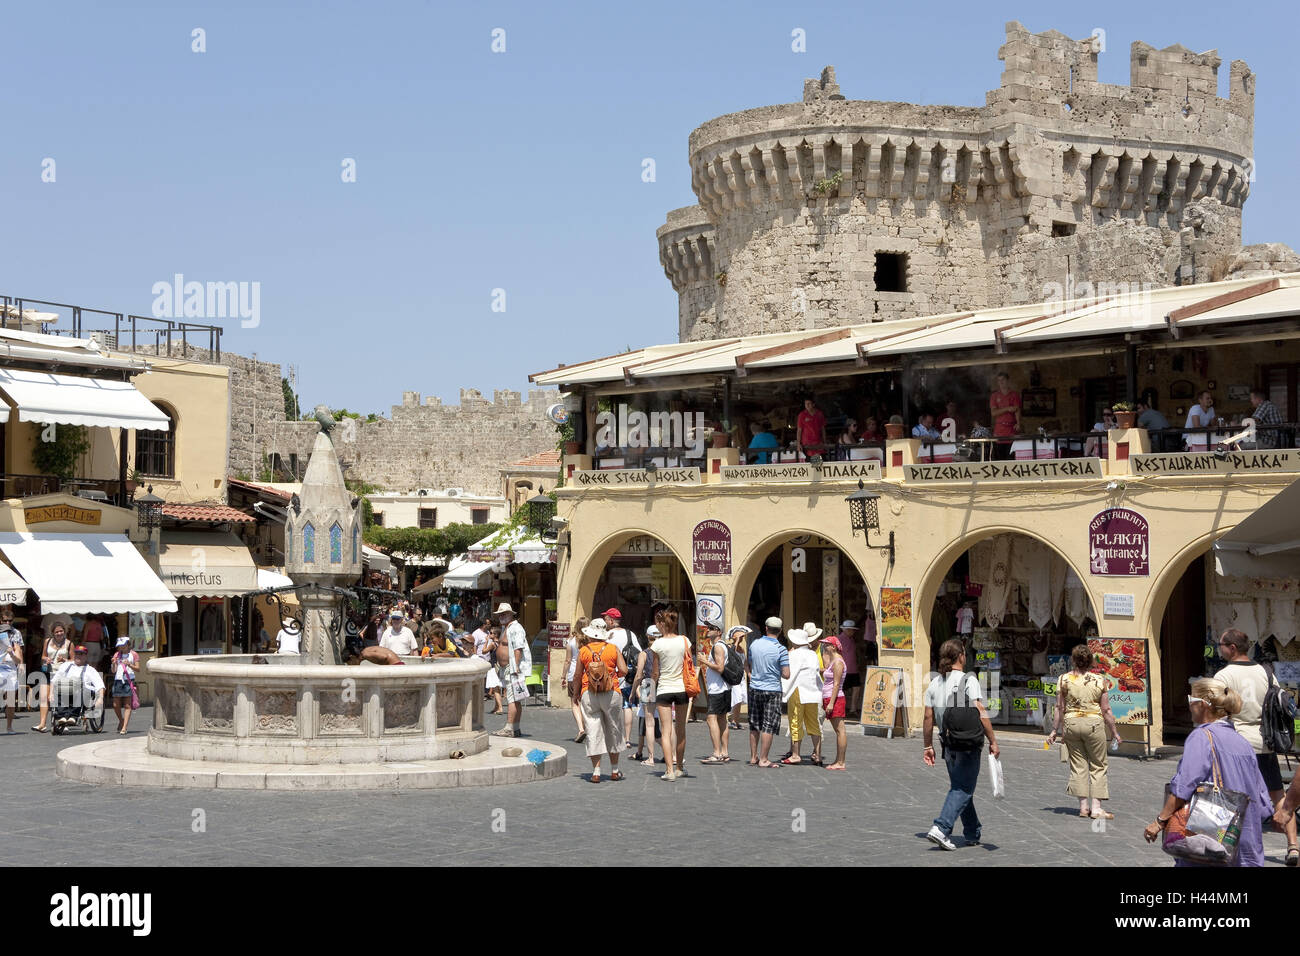 Europe, Southern, Europe, Greece, island Rhodes, north part, Rhodes town, Old Town, Hippokrates space, tourist, no model release, Stock Photo